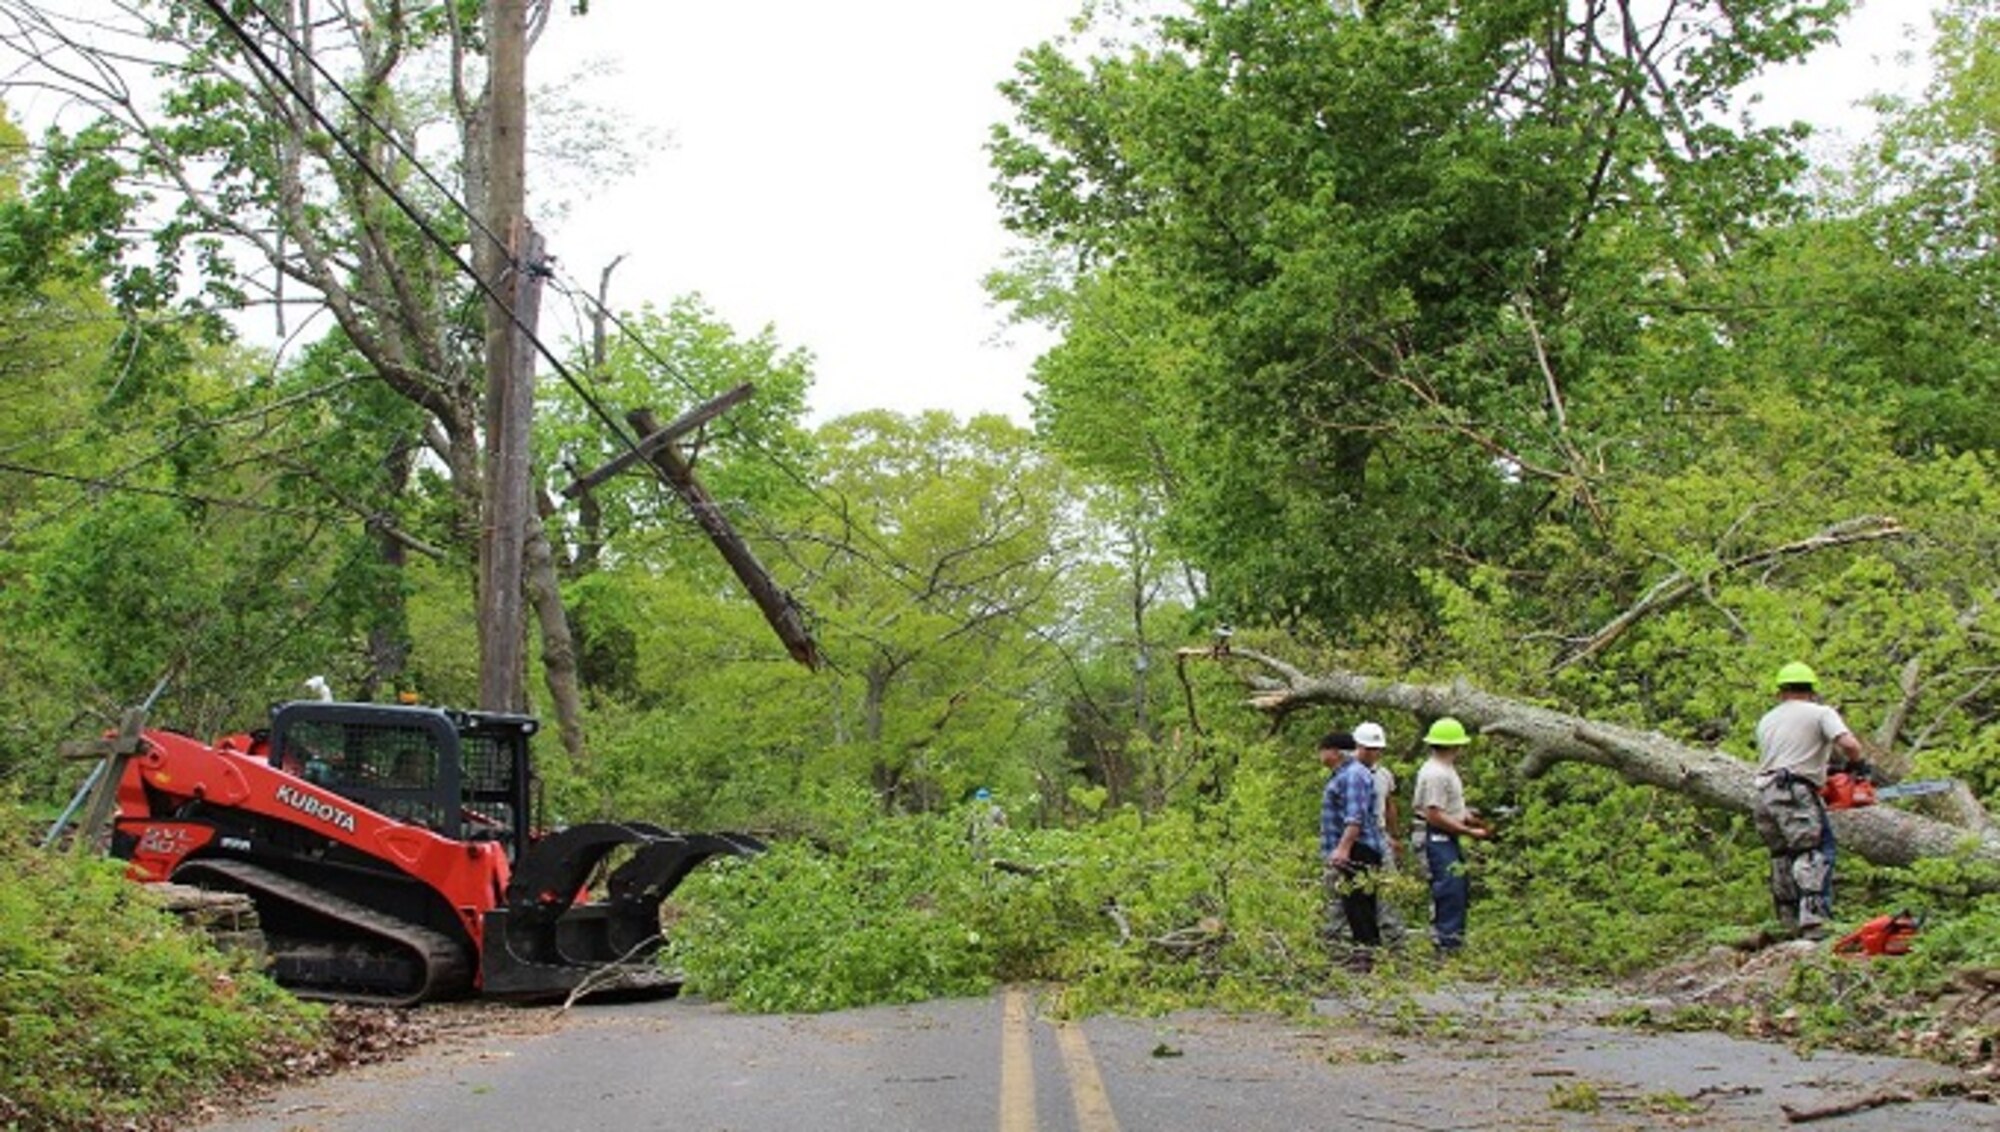 A resident surveys the road clearing progress by members of the 103rd Civil Engineering Squadron May 18, 2018 in Bethany, Conn. The Connecticut National Guard was activated to assist local and state to clear roads made impassable by the storm May 15, 2018. (U.S. Air National Guard photo by 1st Lt. Jen Pierce/released)